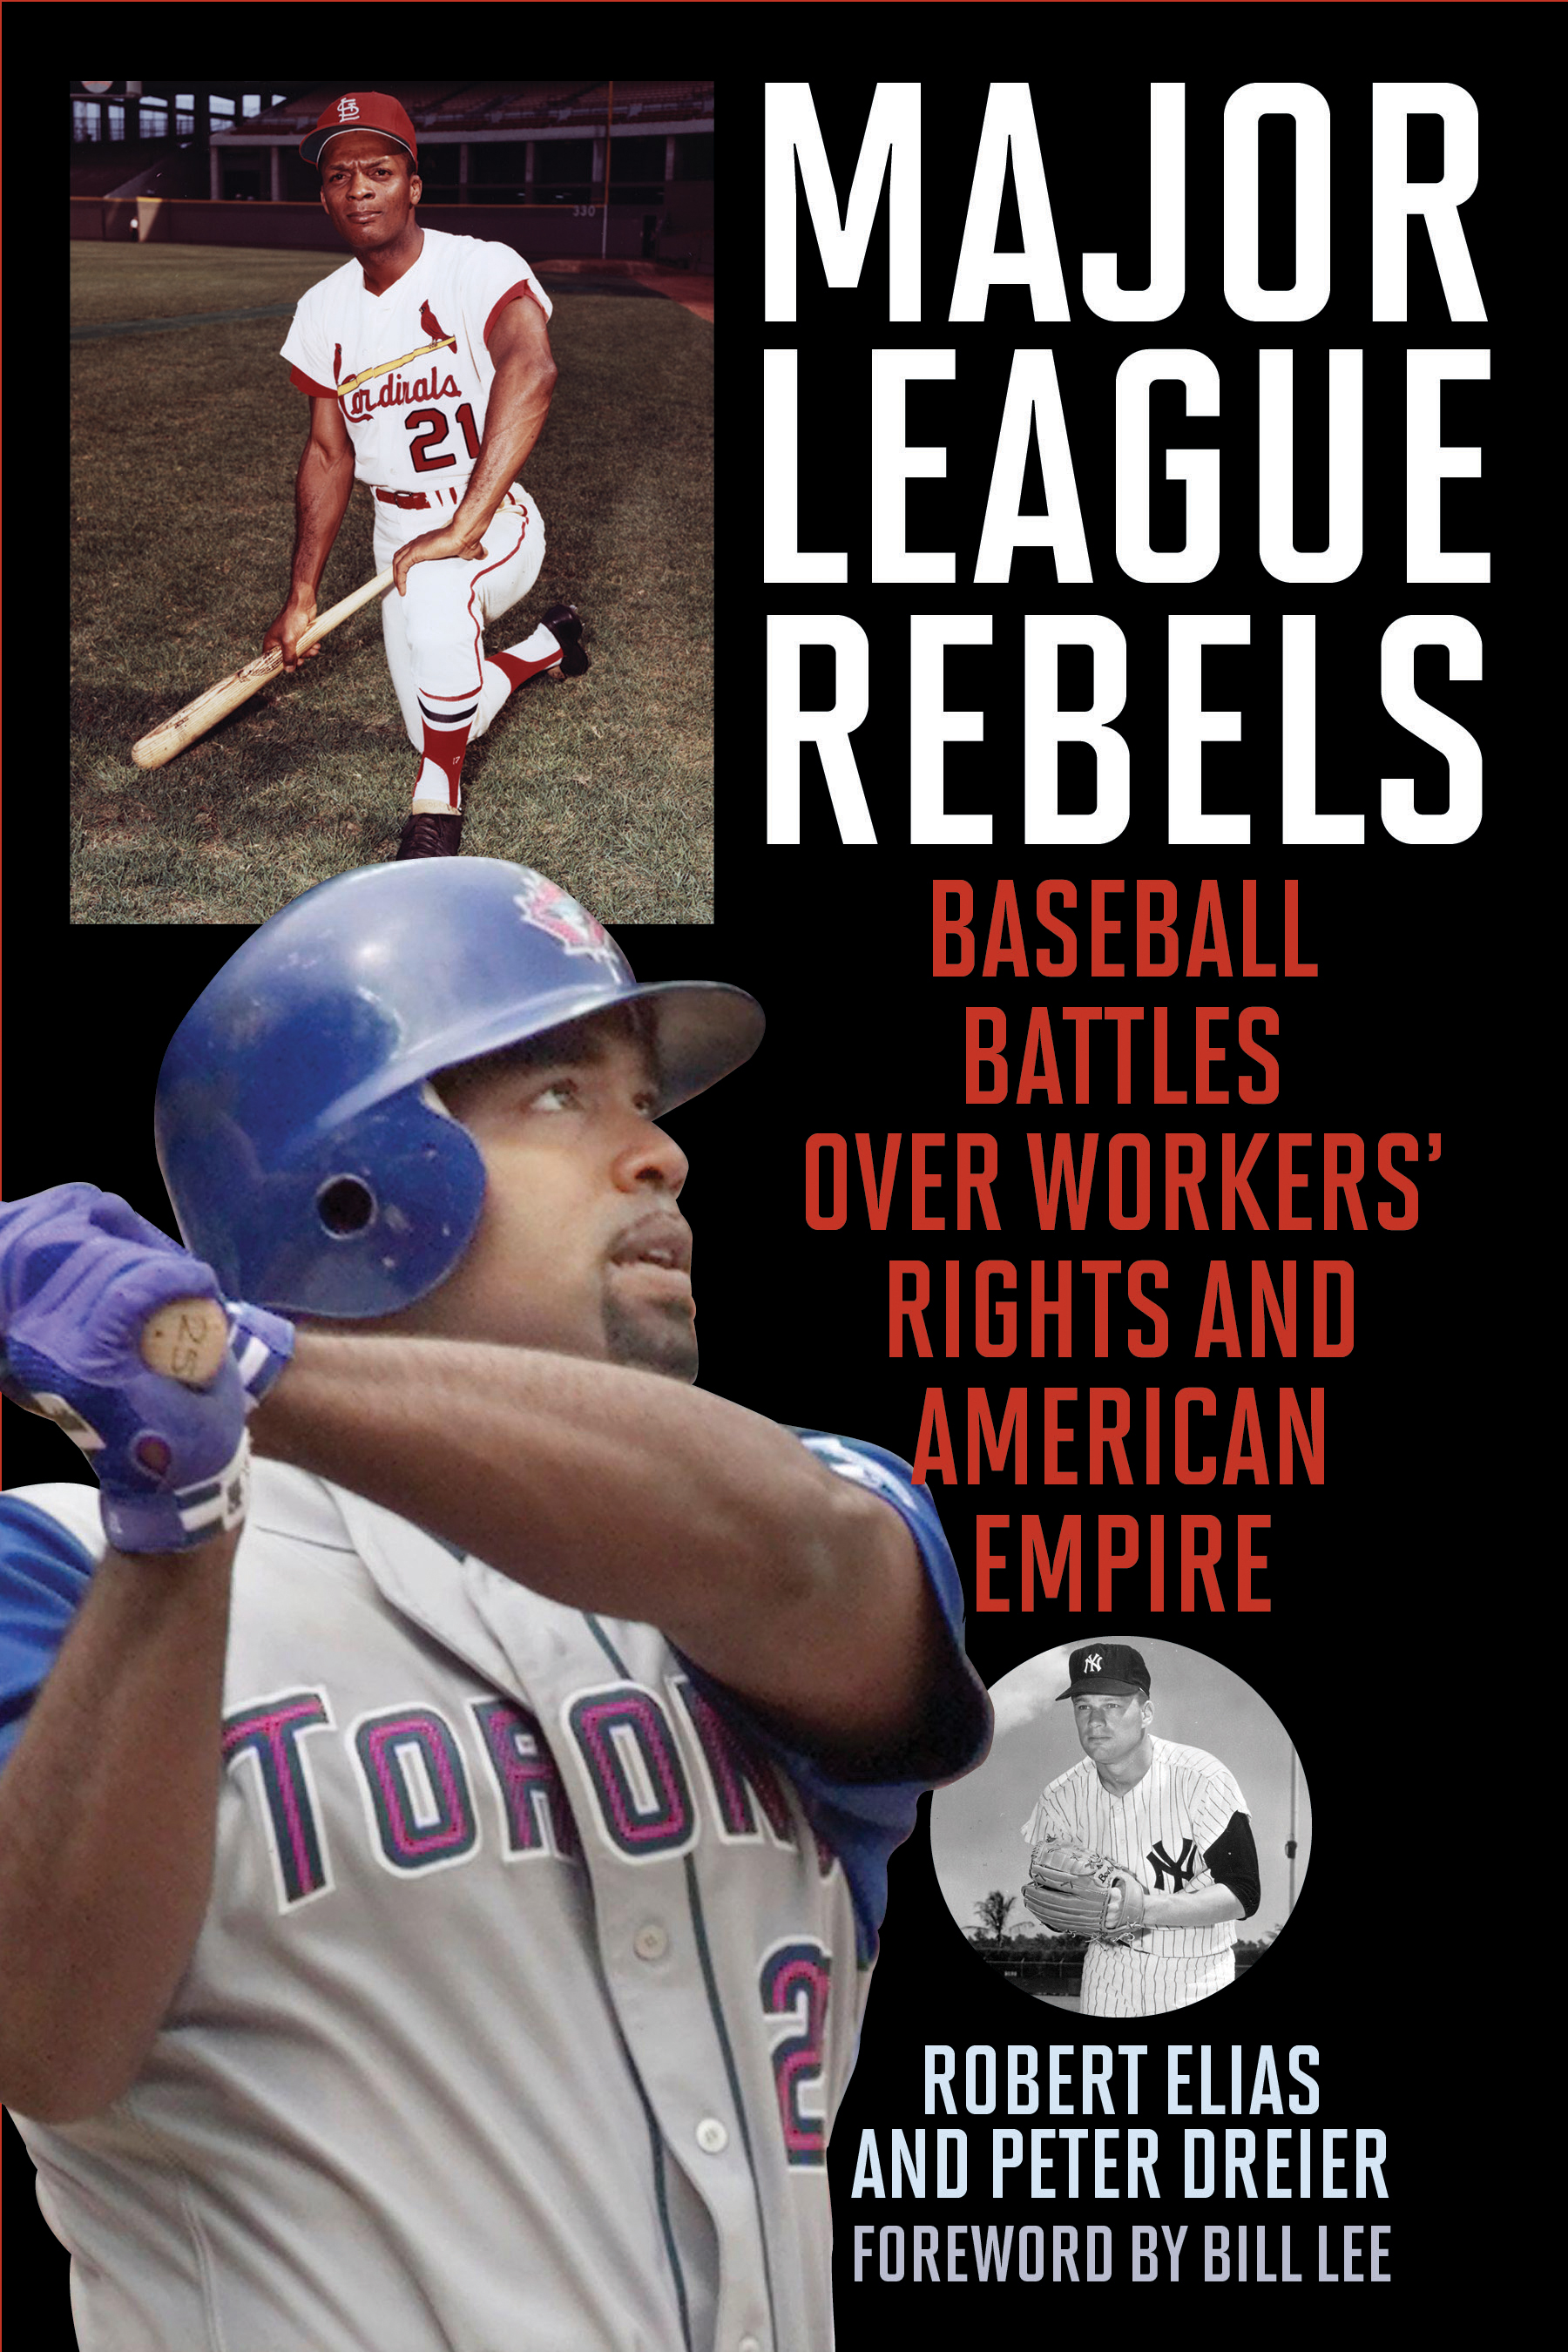 Major League Rebels: Baseball Battles over Workers' Rights and American Empire